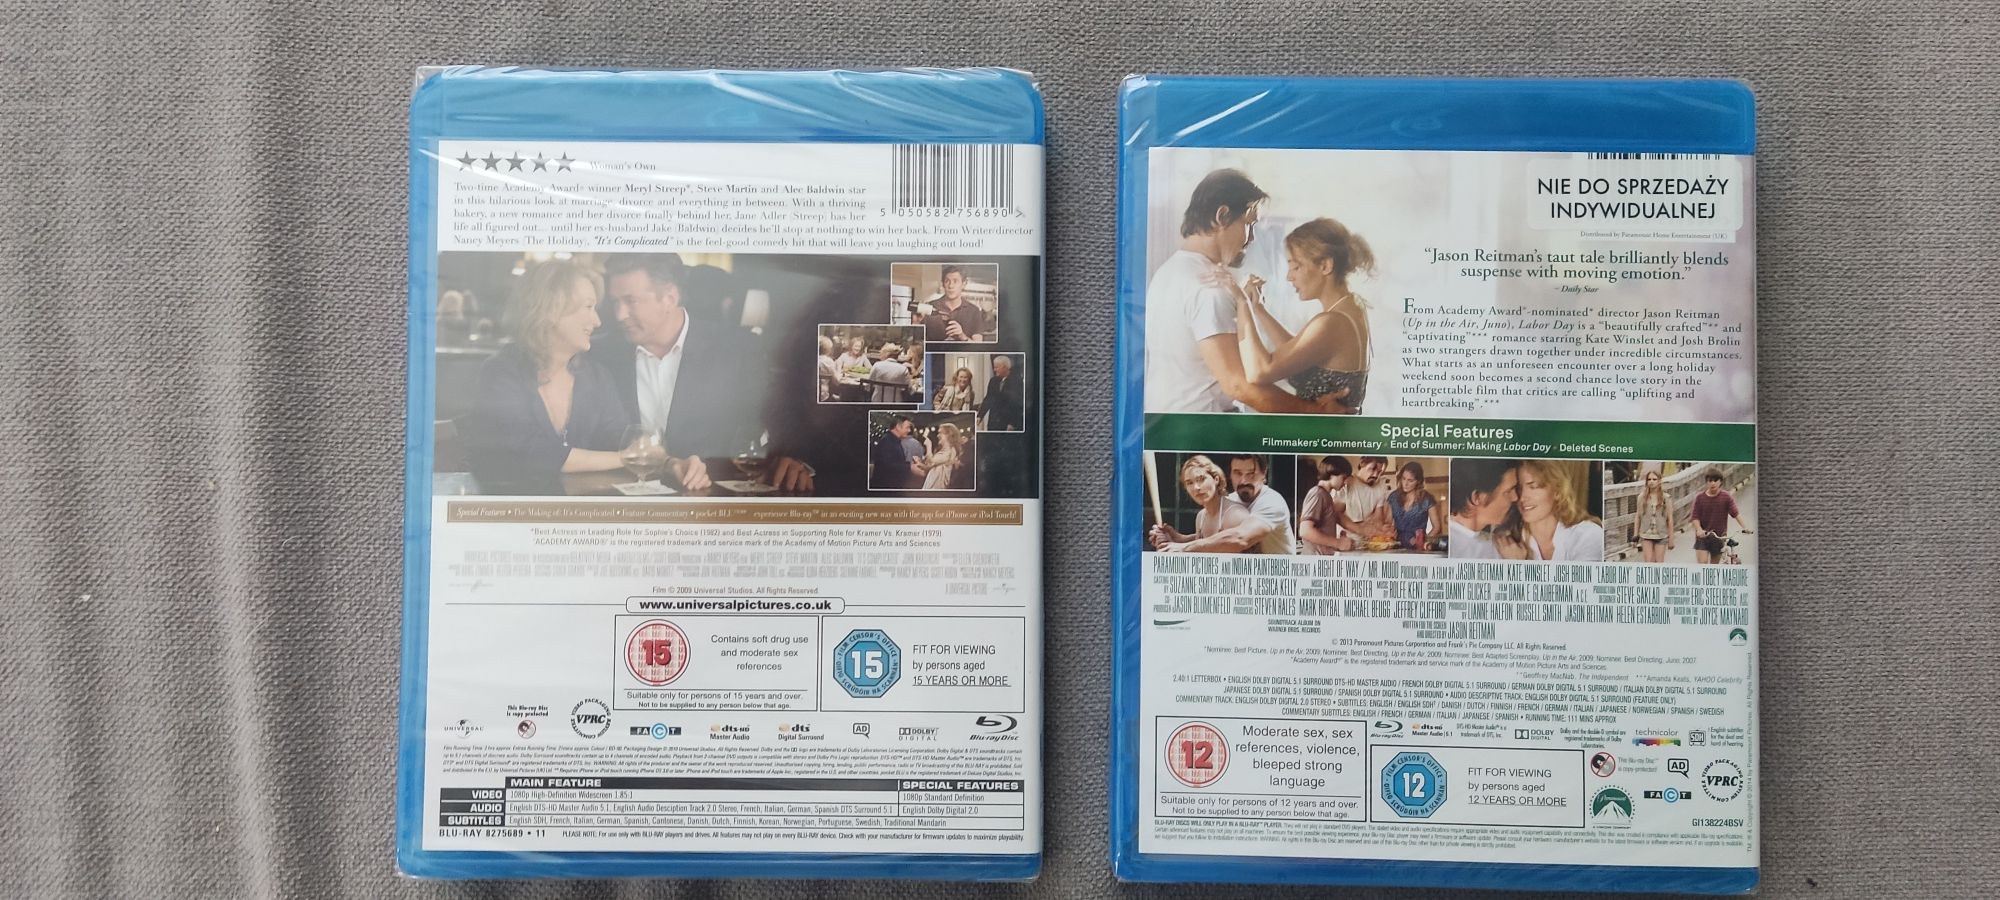 It's Complicated Labor Day 2 bluray Meryl Streep Kate Winslet bez pl